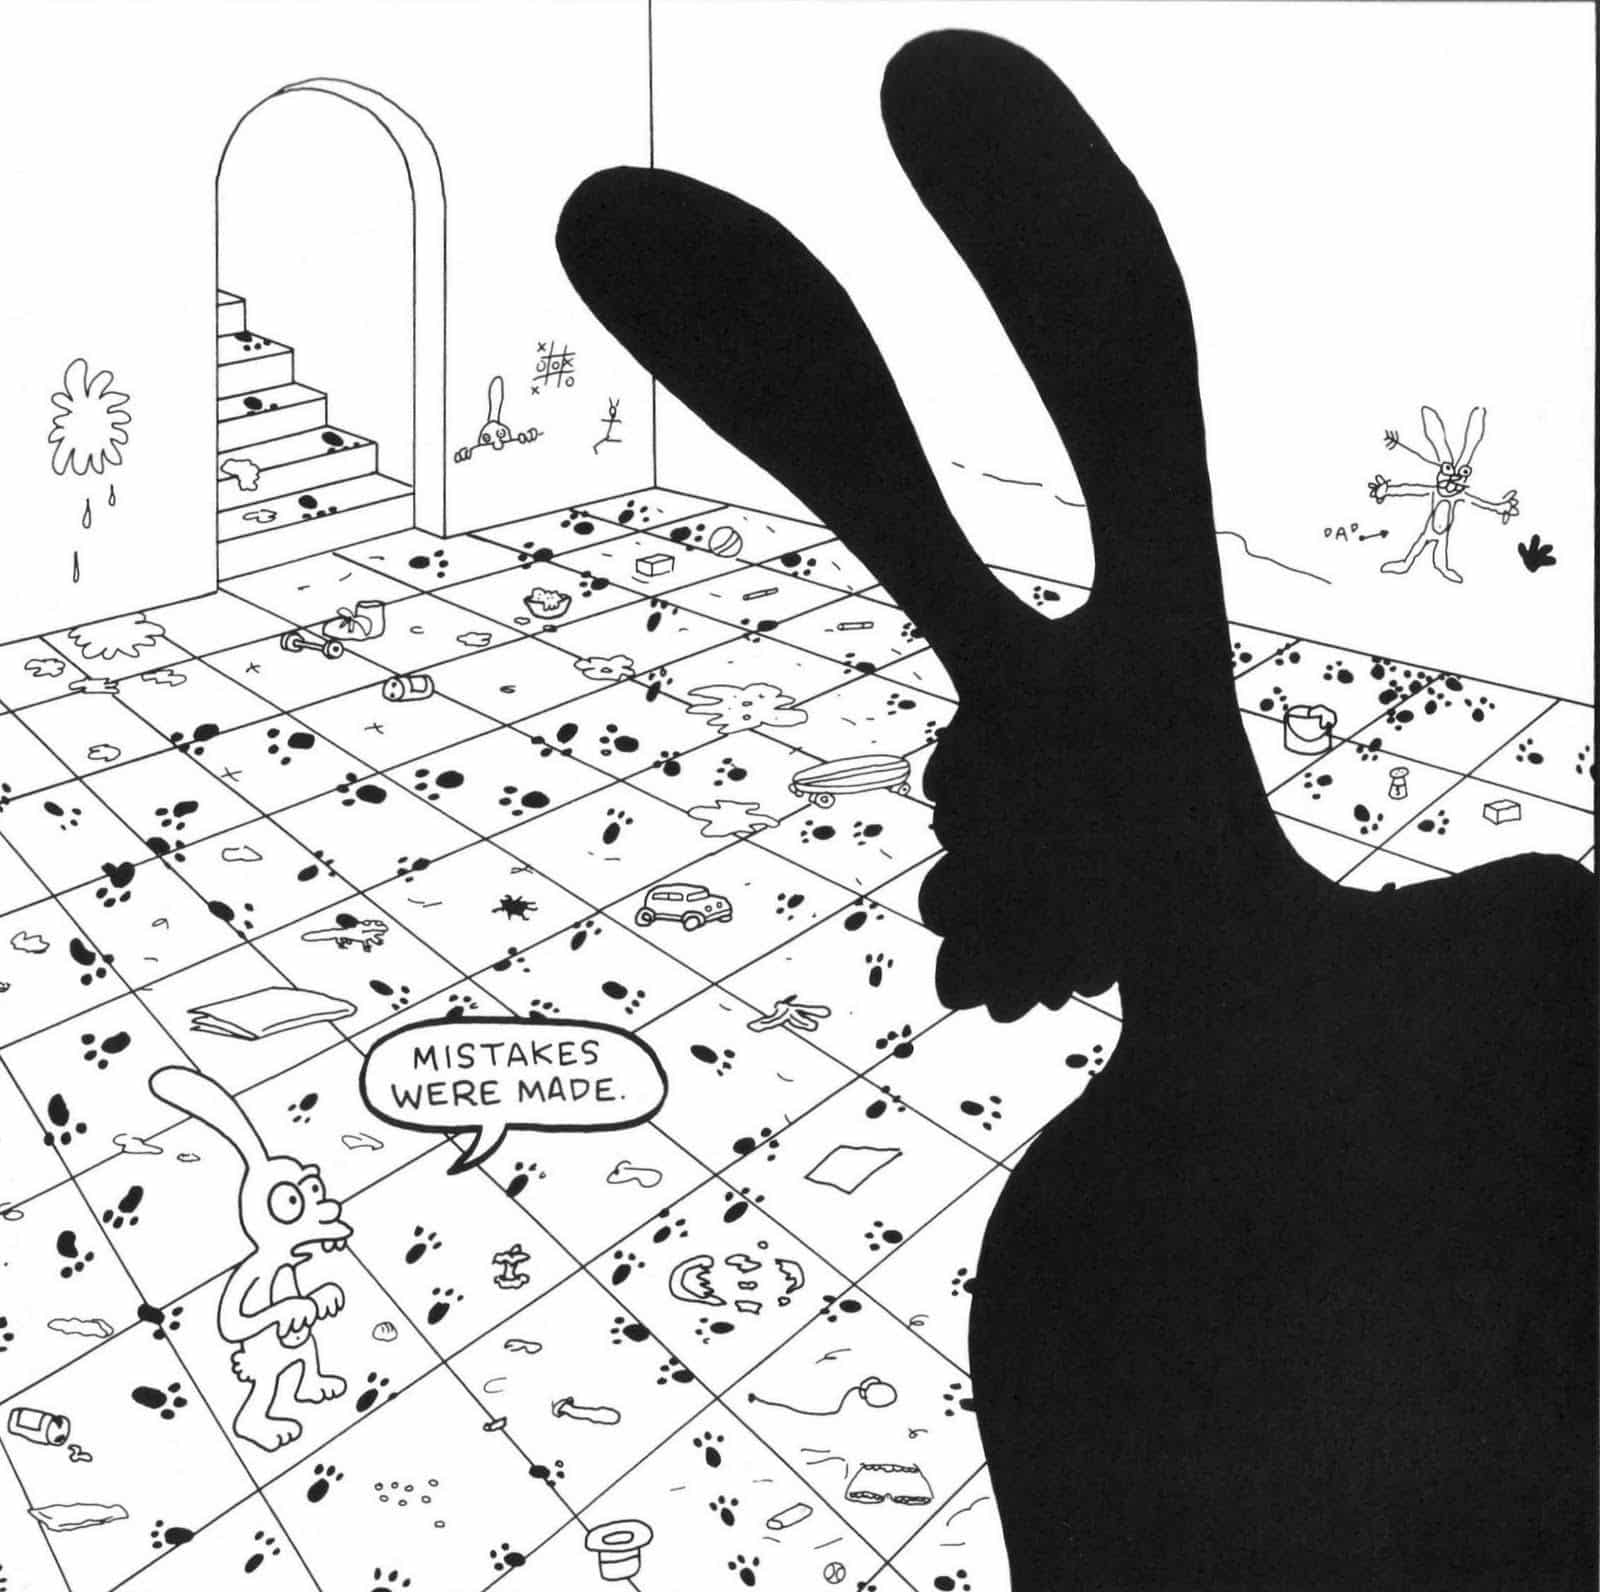 "Mistakes were Made", a cartoon by Matt Groening, from his series Life is Hell.